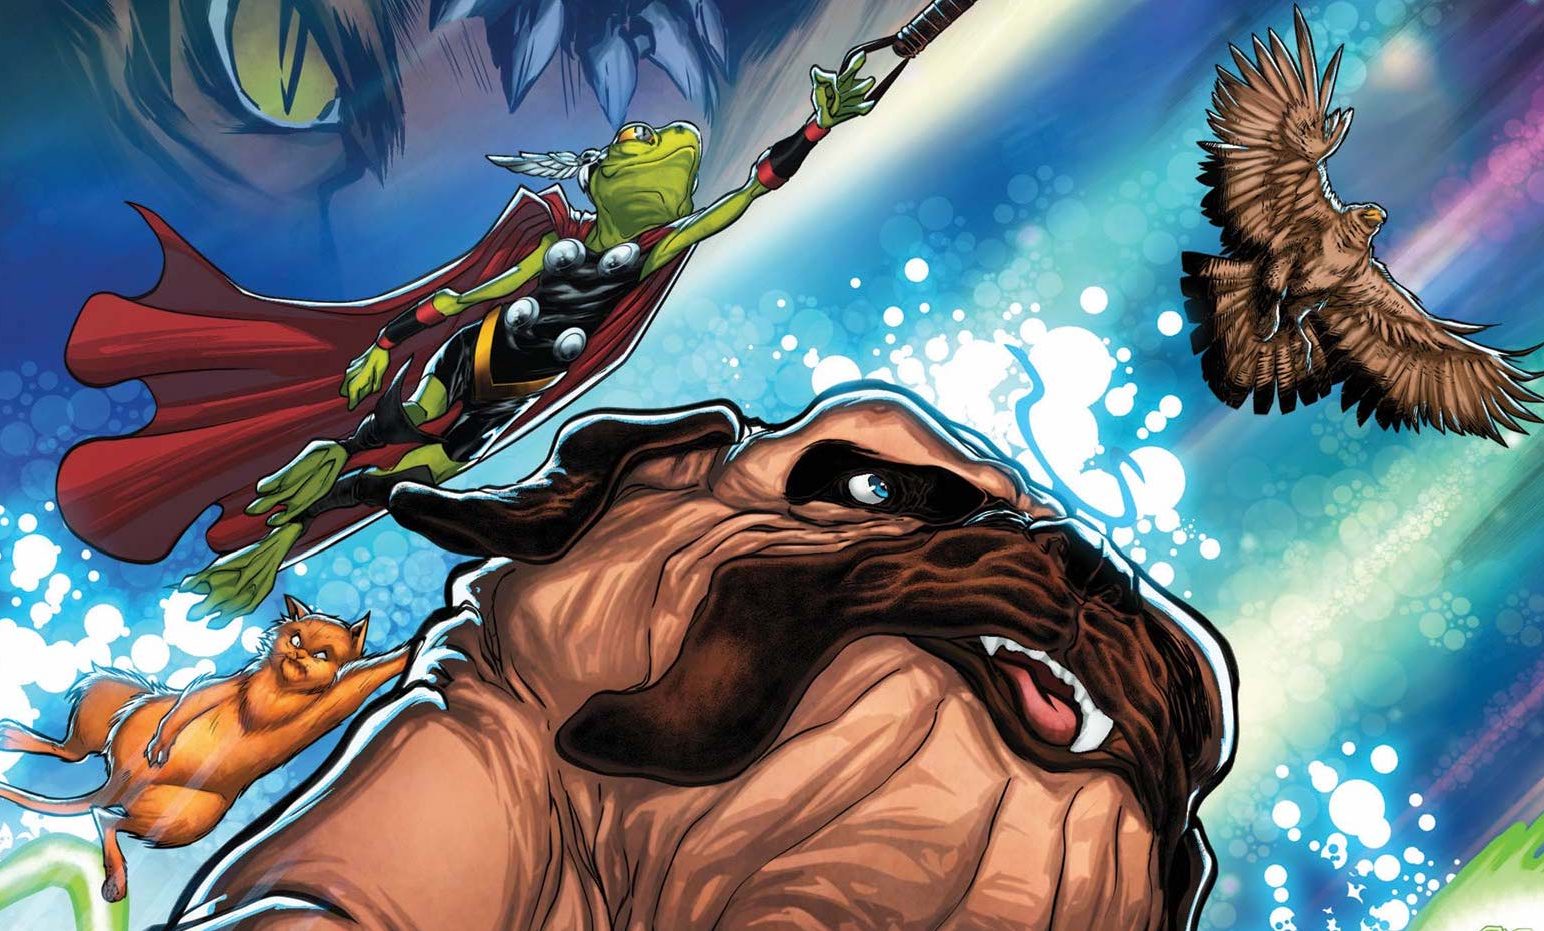 'Marvel Unleashed' #1 takes its super pets seriously